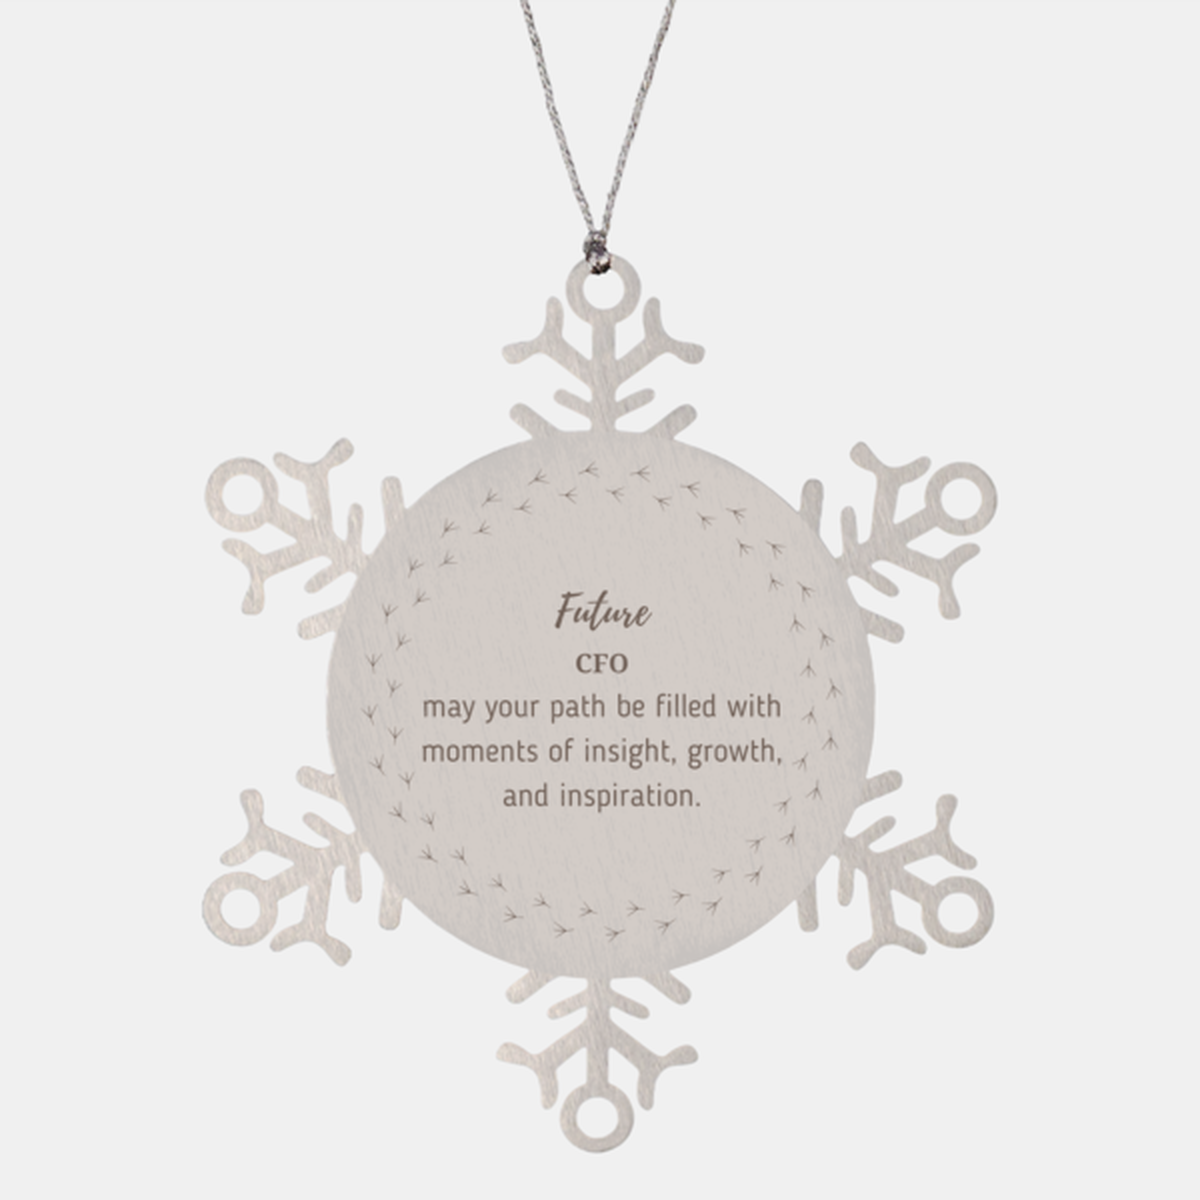 Future CFO Gifts, May your path be filled with moments of insight, Graduation Gifts for New CFO, Christmas Unique Snowflake Ornament For Men, Women, Friends